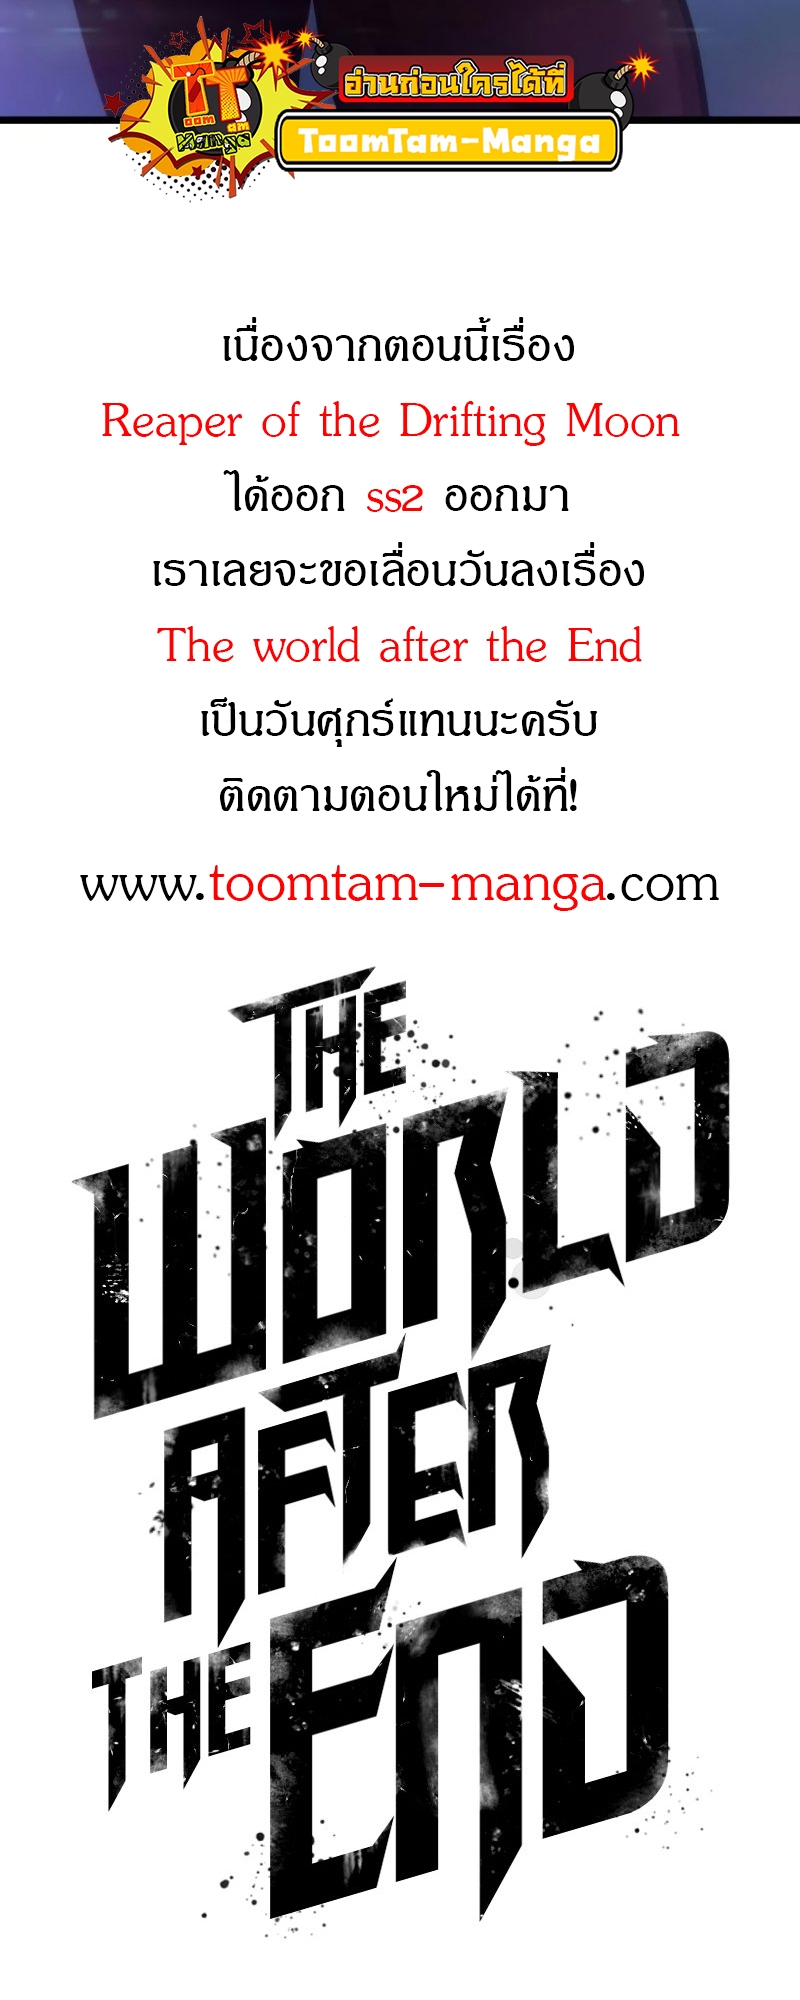 The world after the End 95 13 10 660091